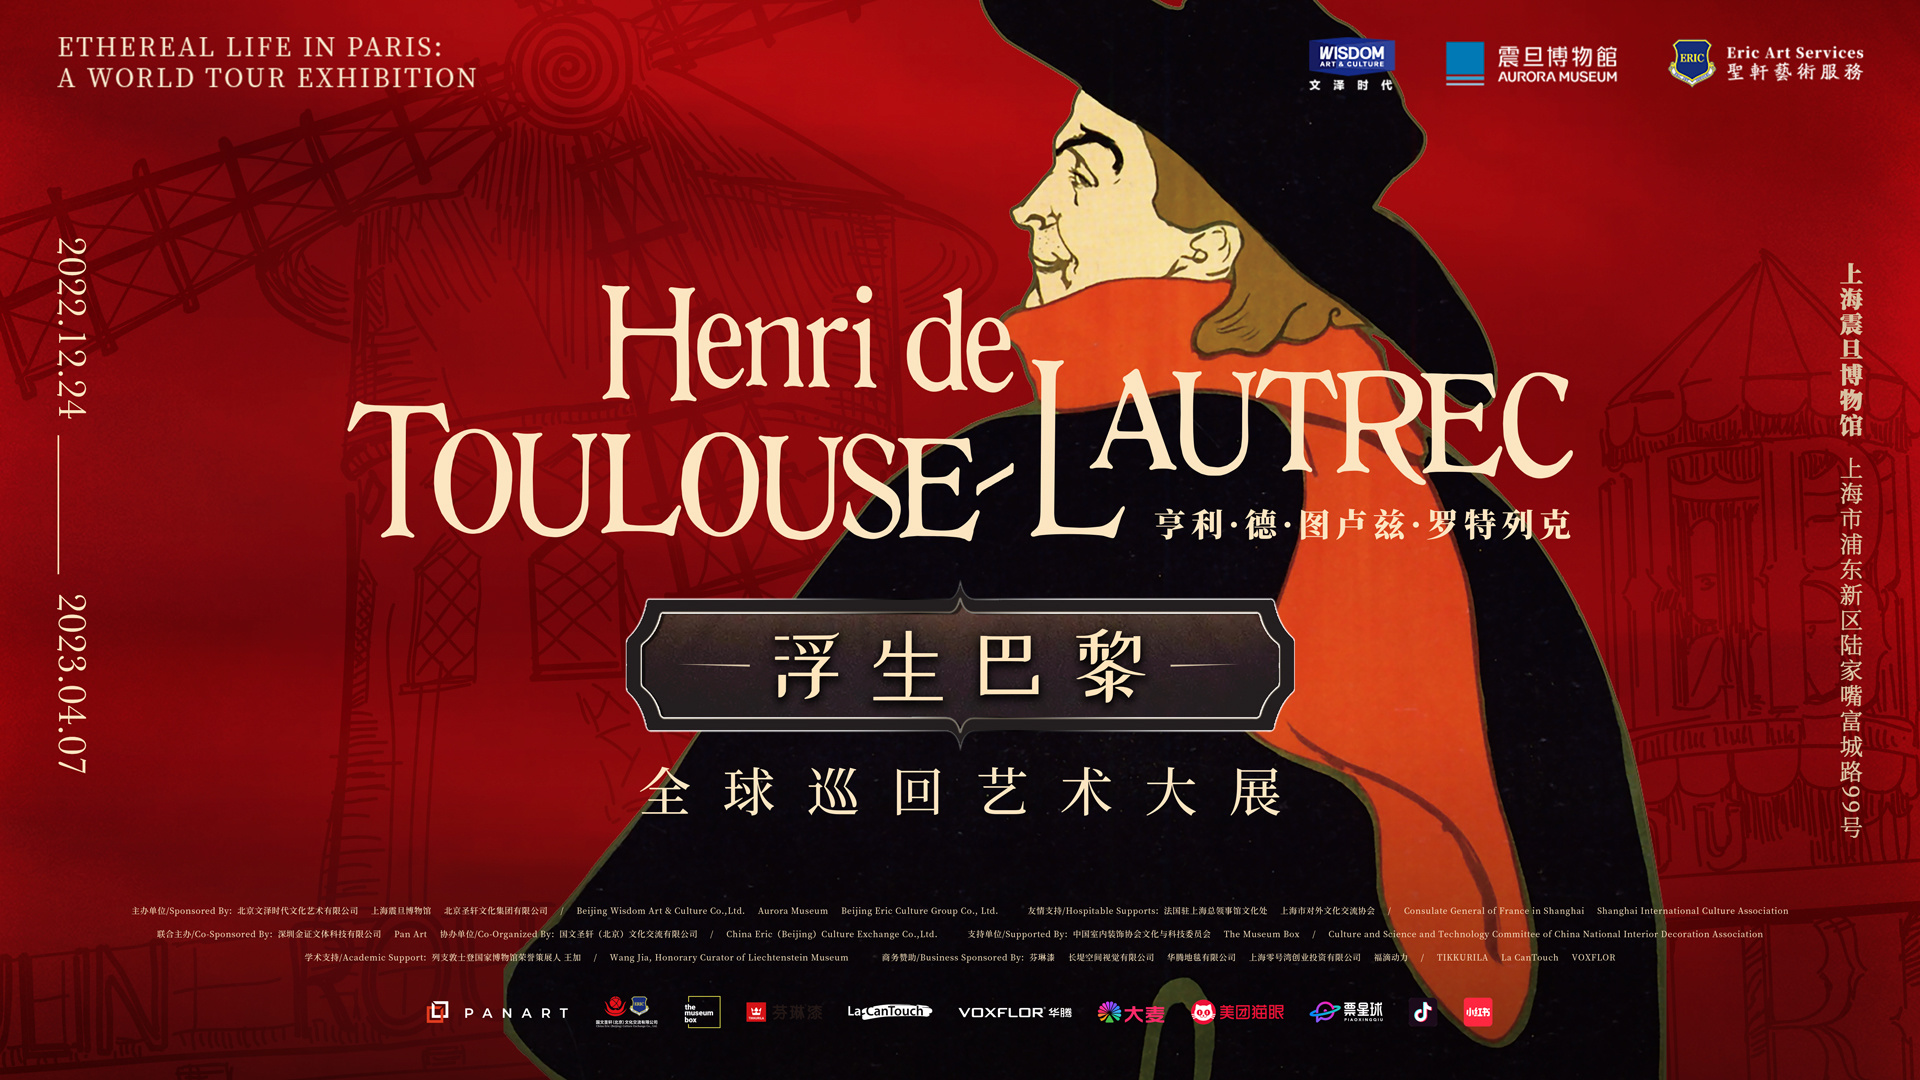 WALLPOST | Ethereal Life in Paris: A World Tour Exhibition with Henri de Toulouse Lautrec China’s Debut in Shanghai